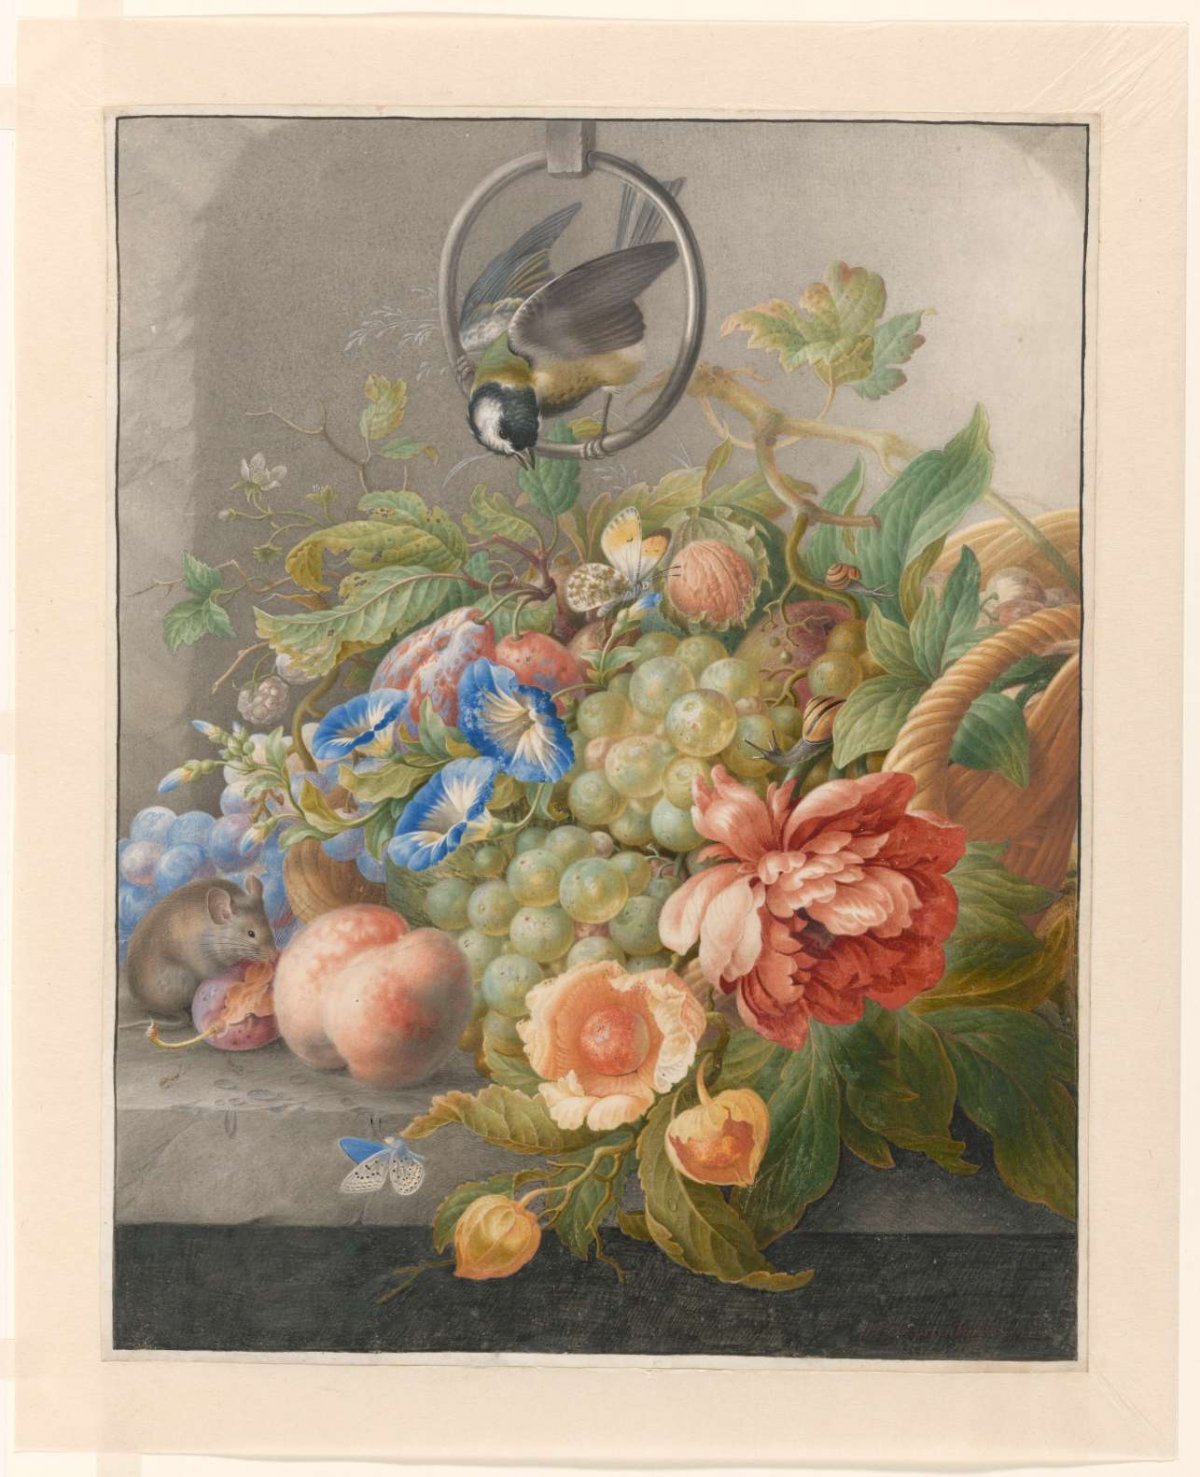 Still Life with Flowers, Fruit, a Great Tit and a Mouse, Herman Henstenburgh, c. 1700 - c. 1710